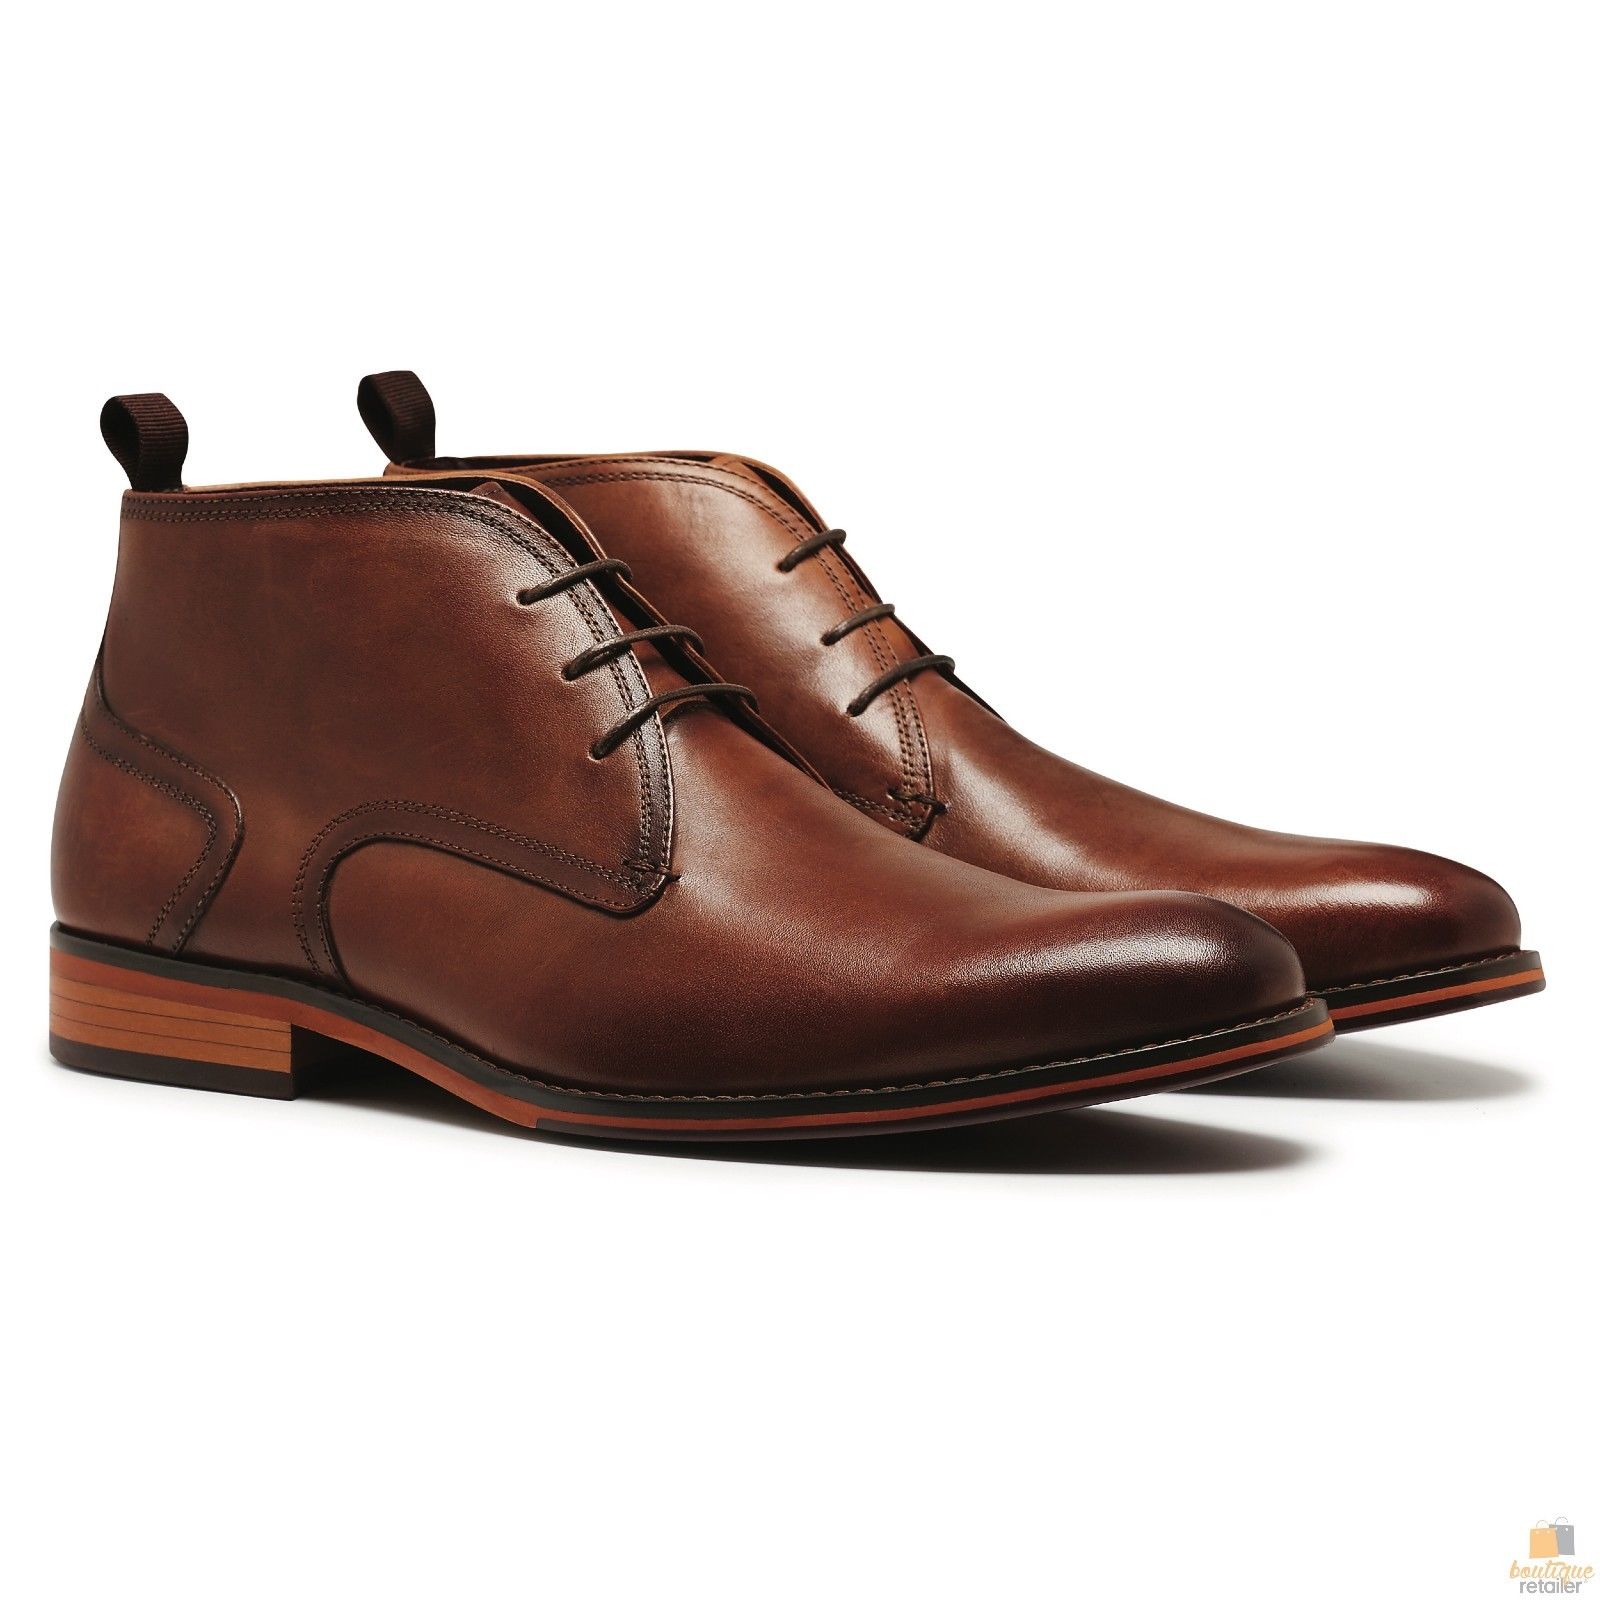 JULIUS MARLOW SPIKE Leather Boots Dress Work Formal Business Shoes ...